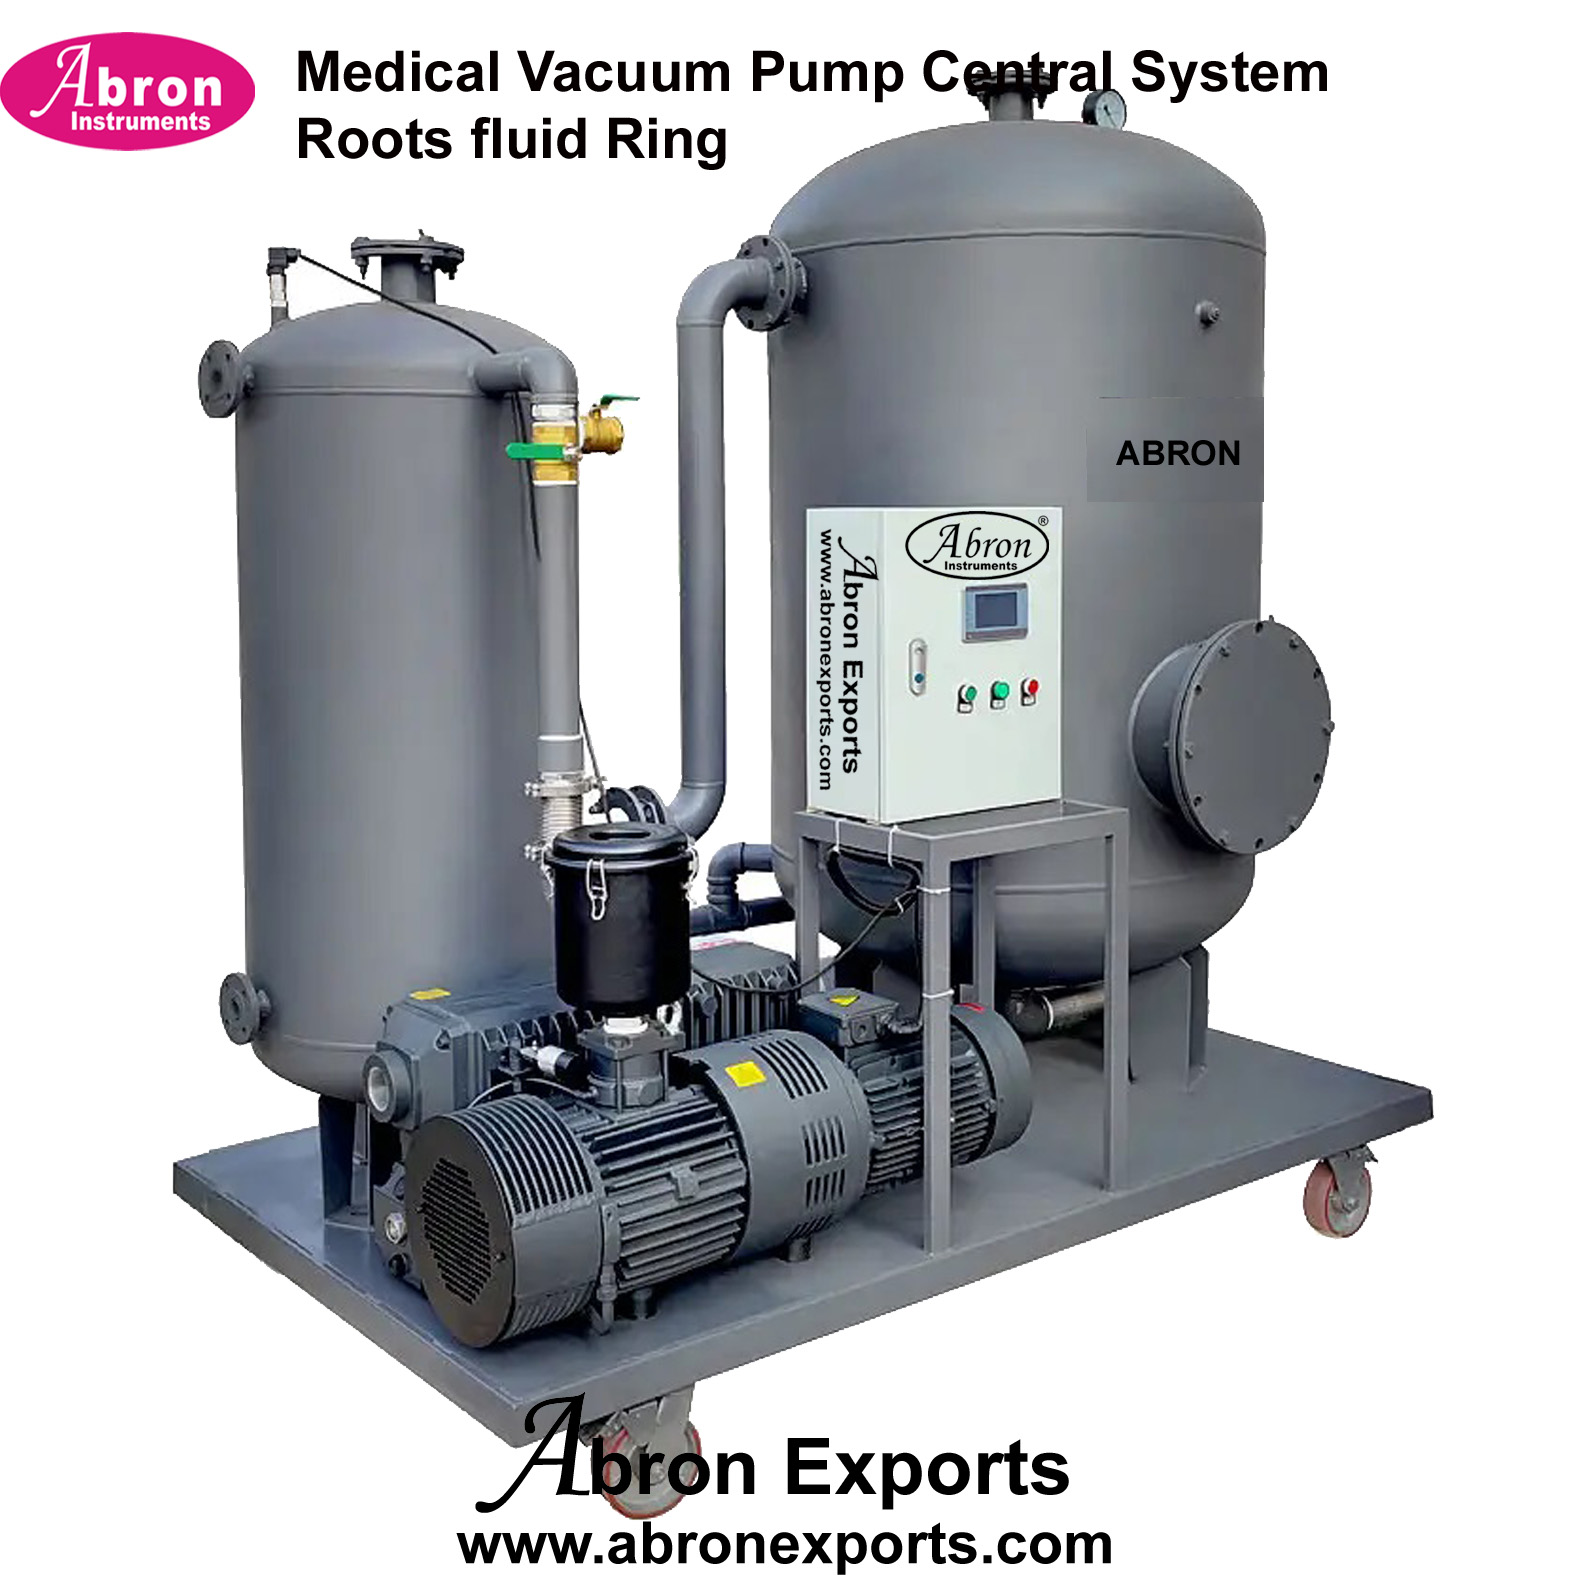 Medical Vacuum Pump Central System Roots Fluid Ring Industrial Medical Vacuum System Abron ABM-1132 